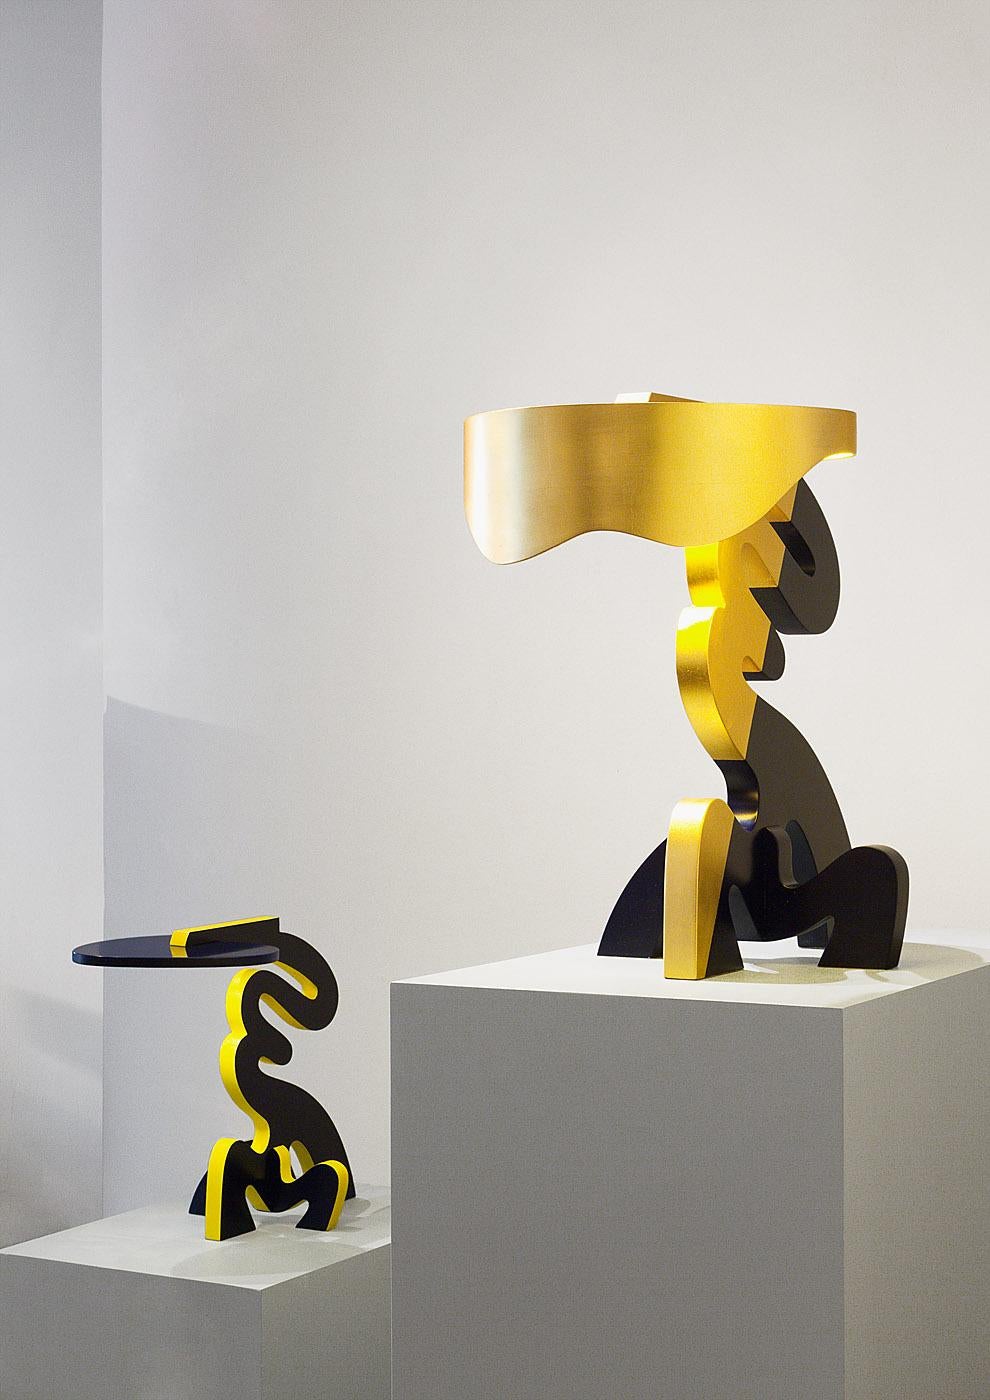 Sculpture-lamp in limited edition, titled, signed and numbered by the artist for the gallery.
Brass
H 60 cm/ 23.62 in.
Dimmer switch
Edition of 40 pieces
Diane de Polignac Edition 2012

Completely handmade, with three finishes available: